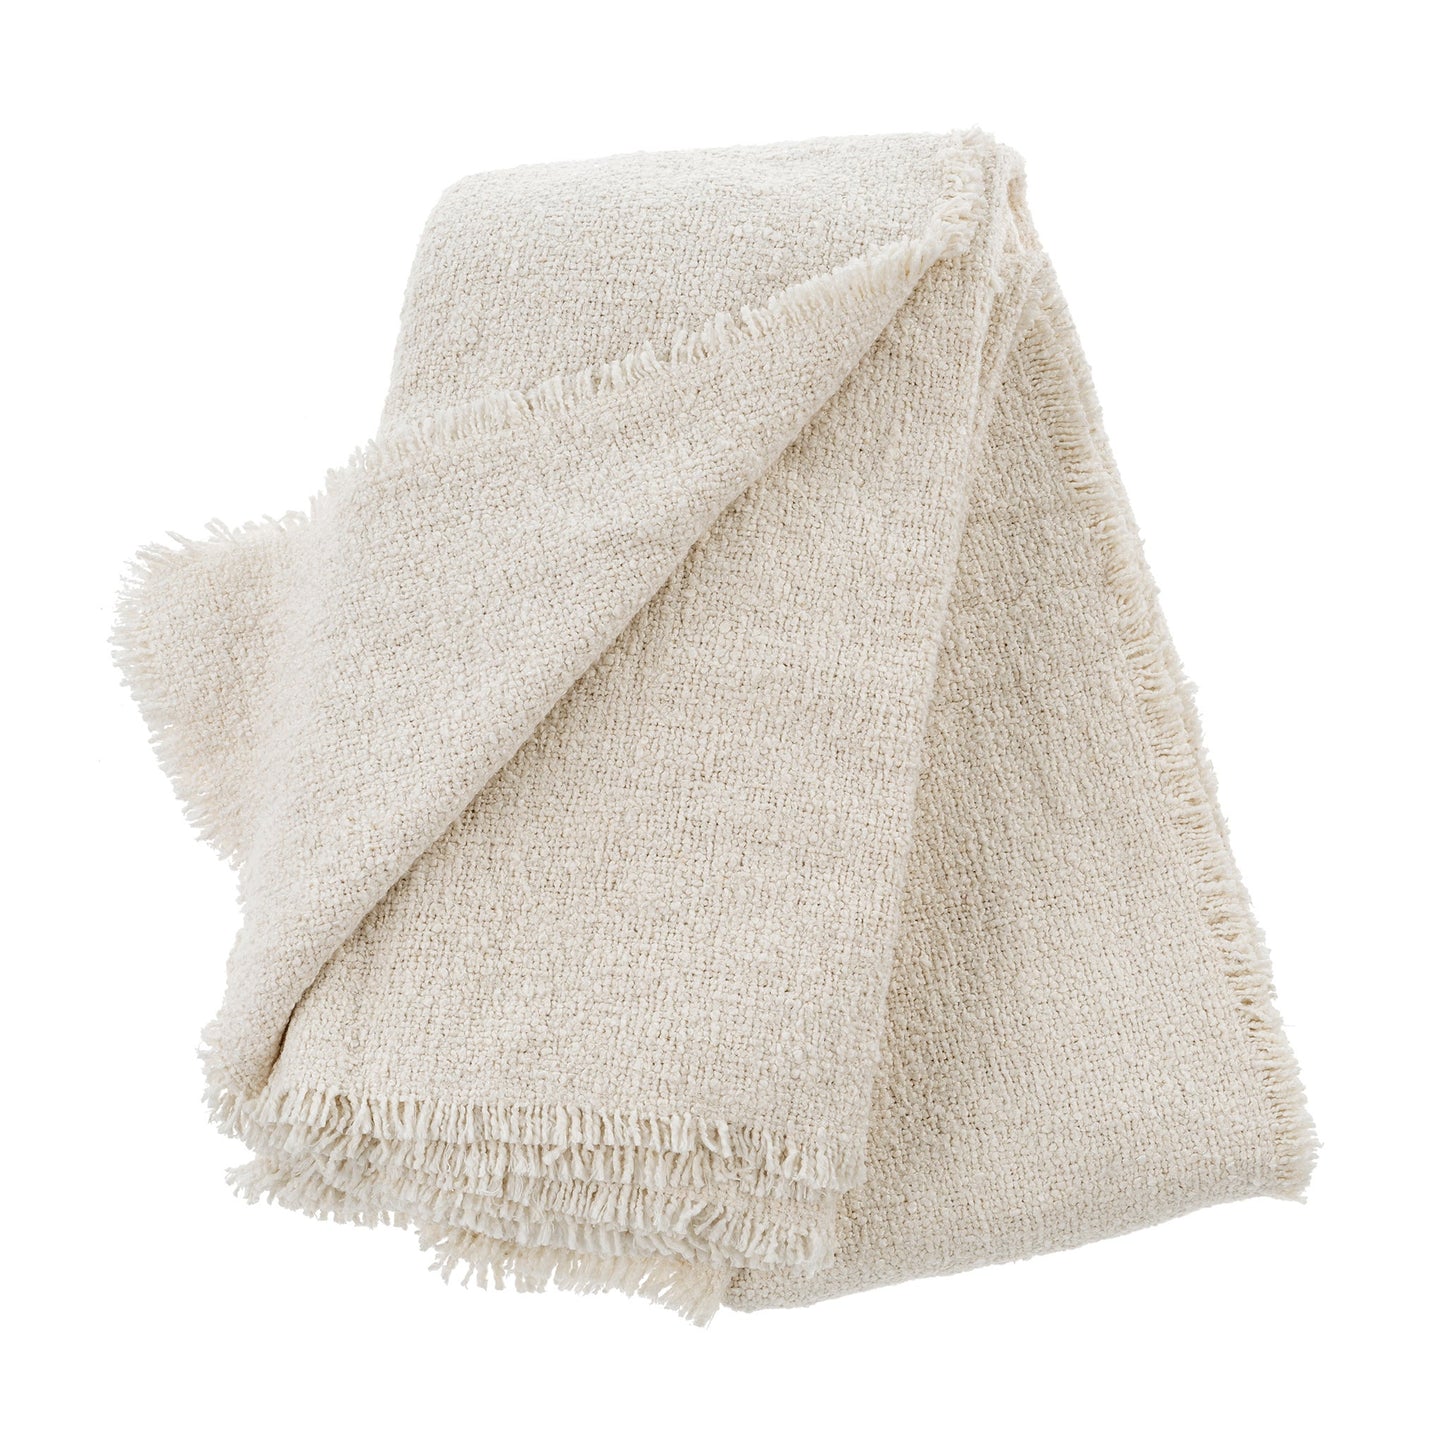 Fringed Boucle Bed Blanket, Off White